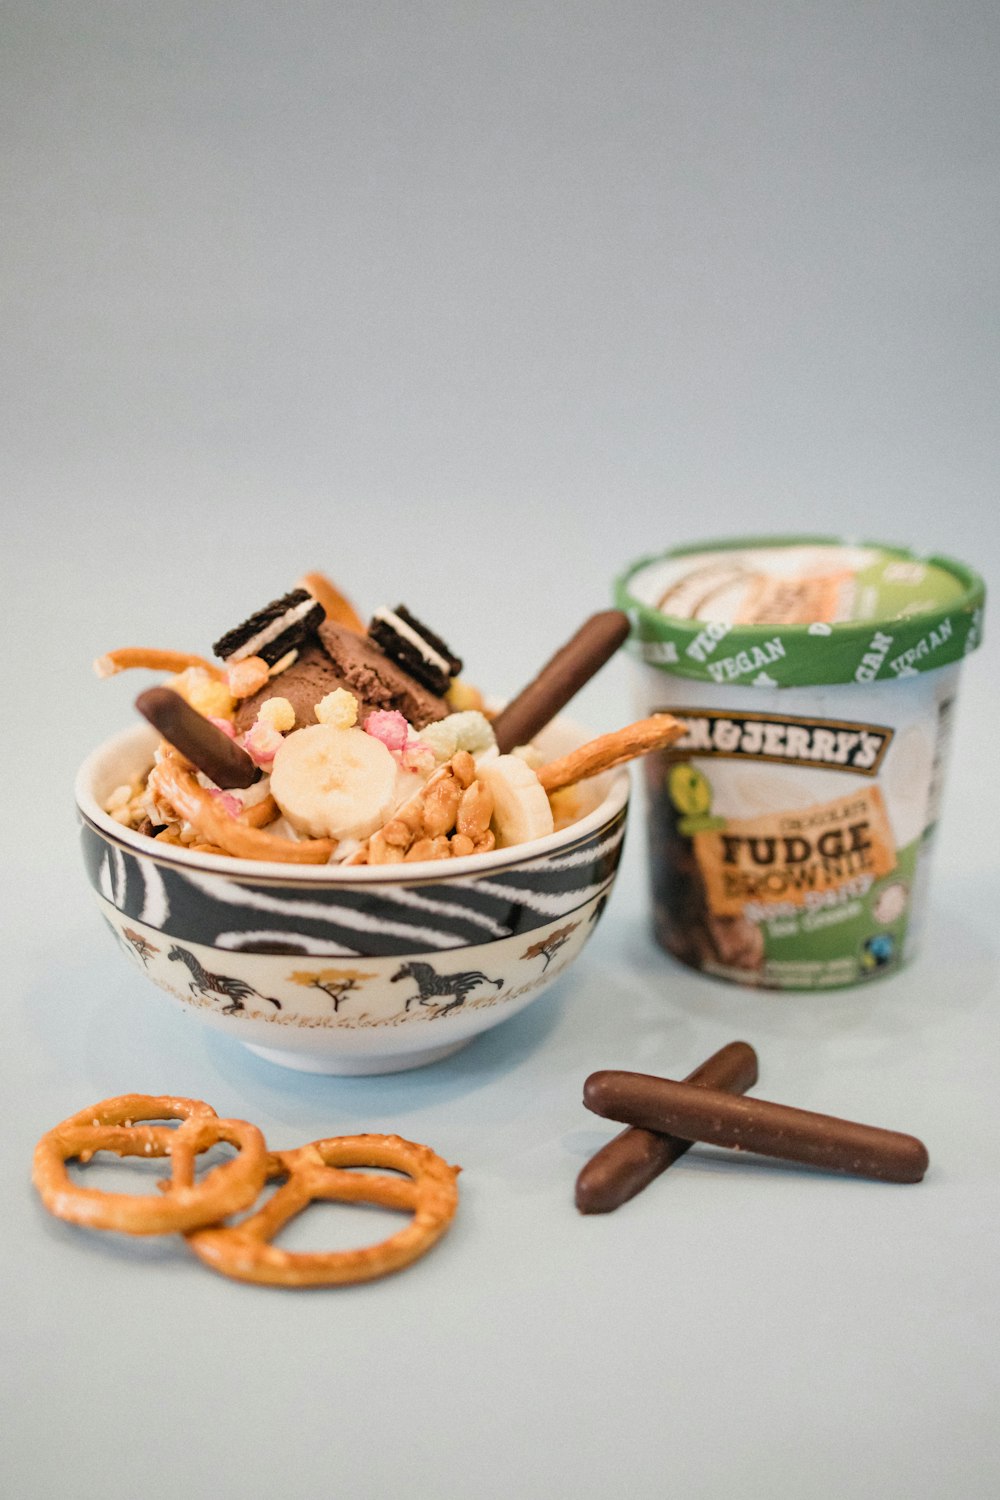 a bowl of cereal with pretzels and a cup of yogurt